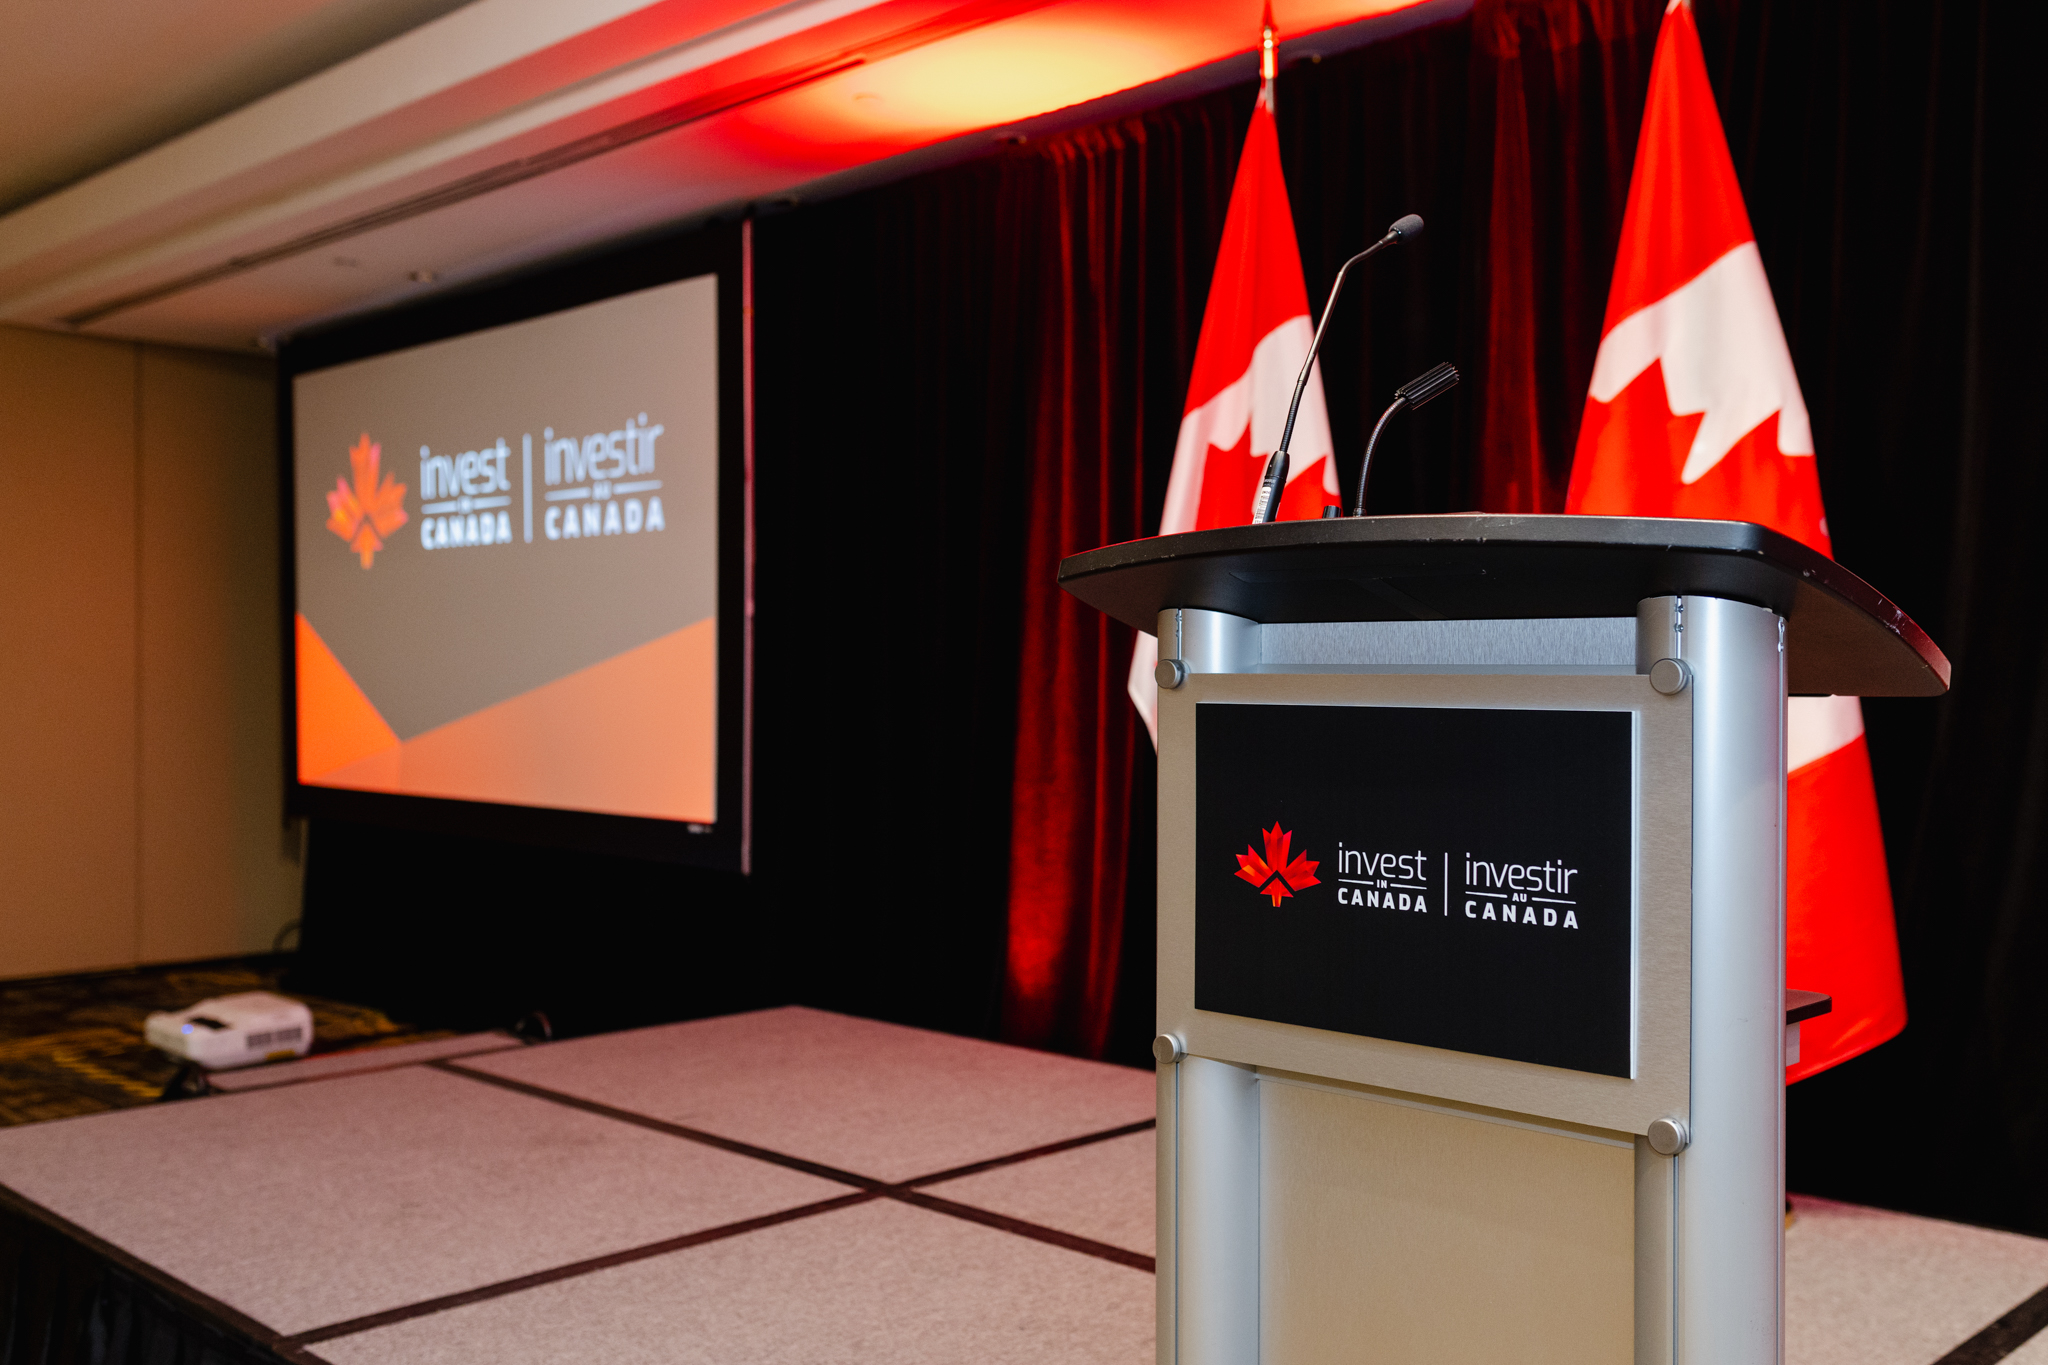 An empty lectern with "Invest in Canada" branding flanked by Canadian flags, featuring event photography, with a projection screen displaying the same logo in the background.